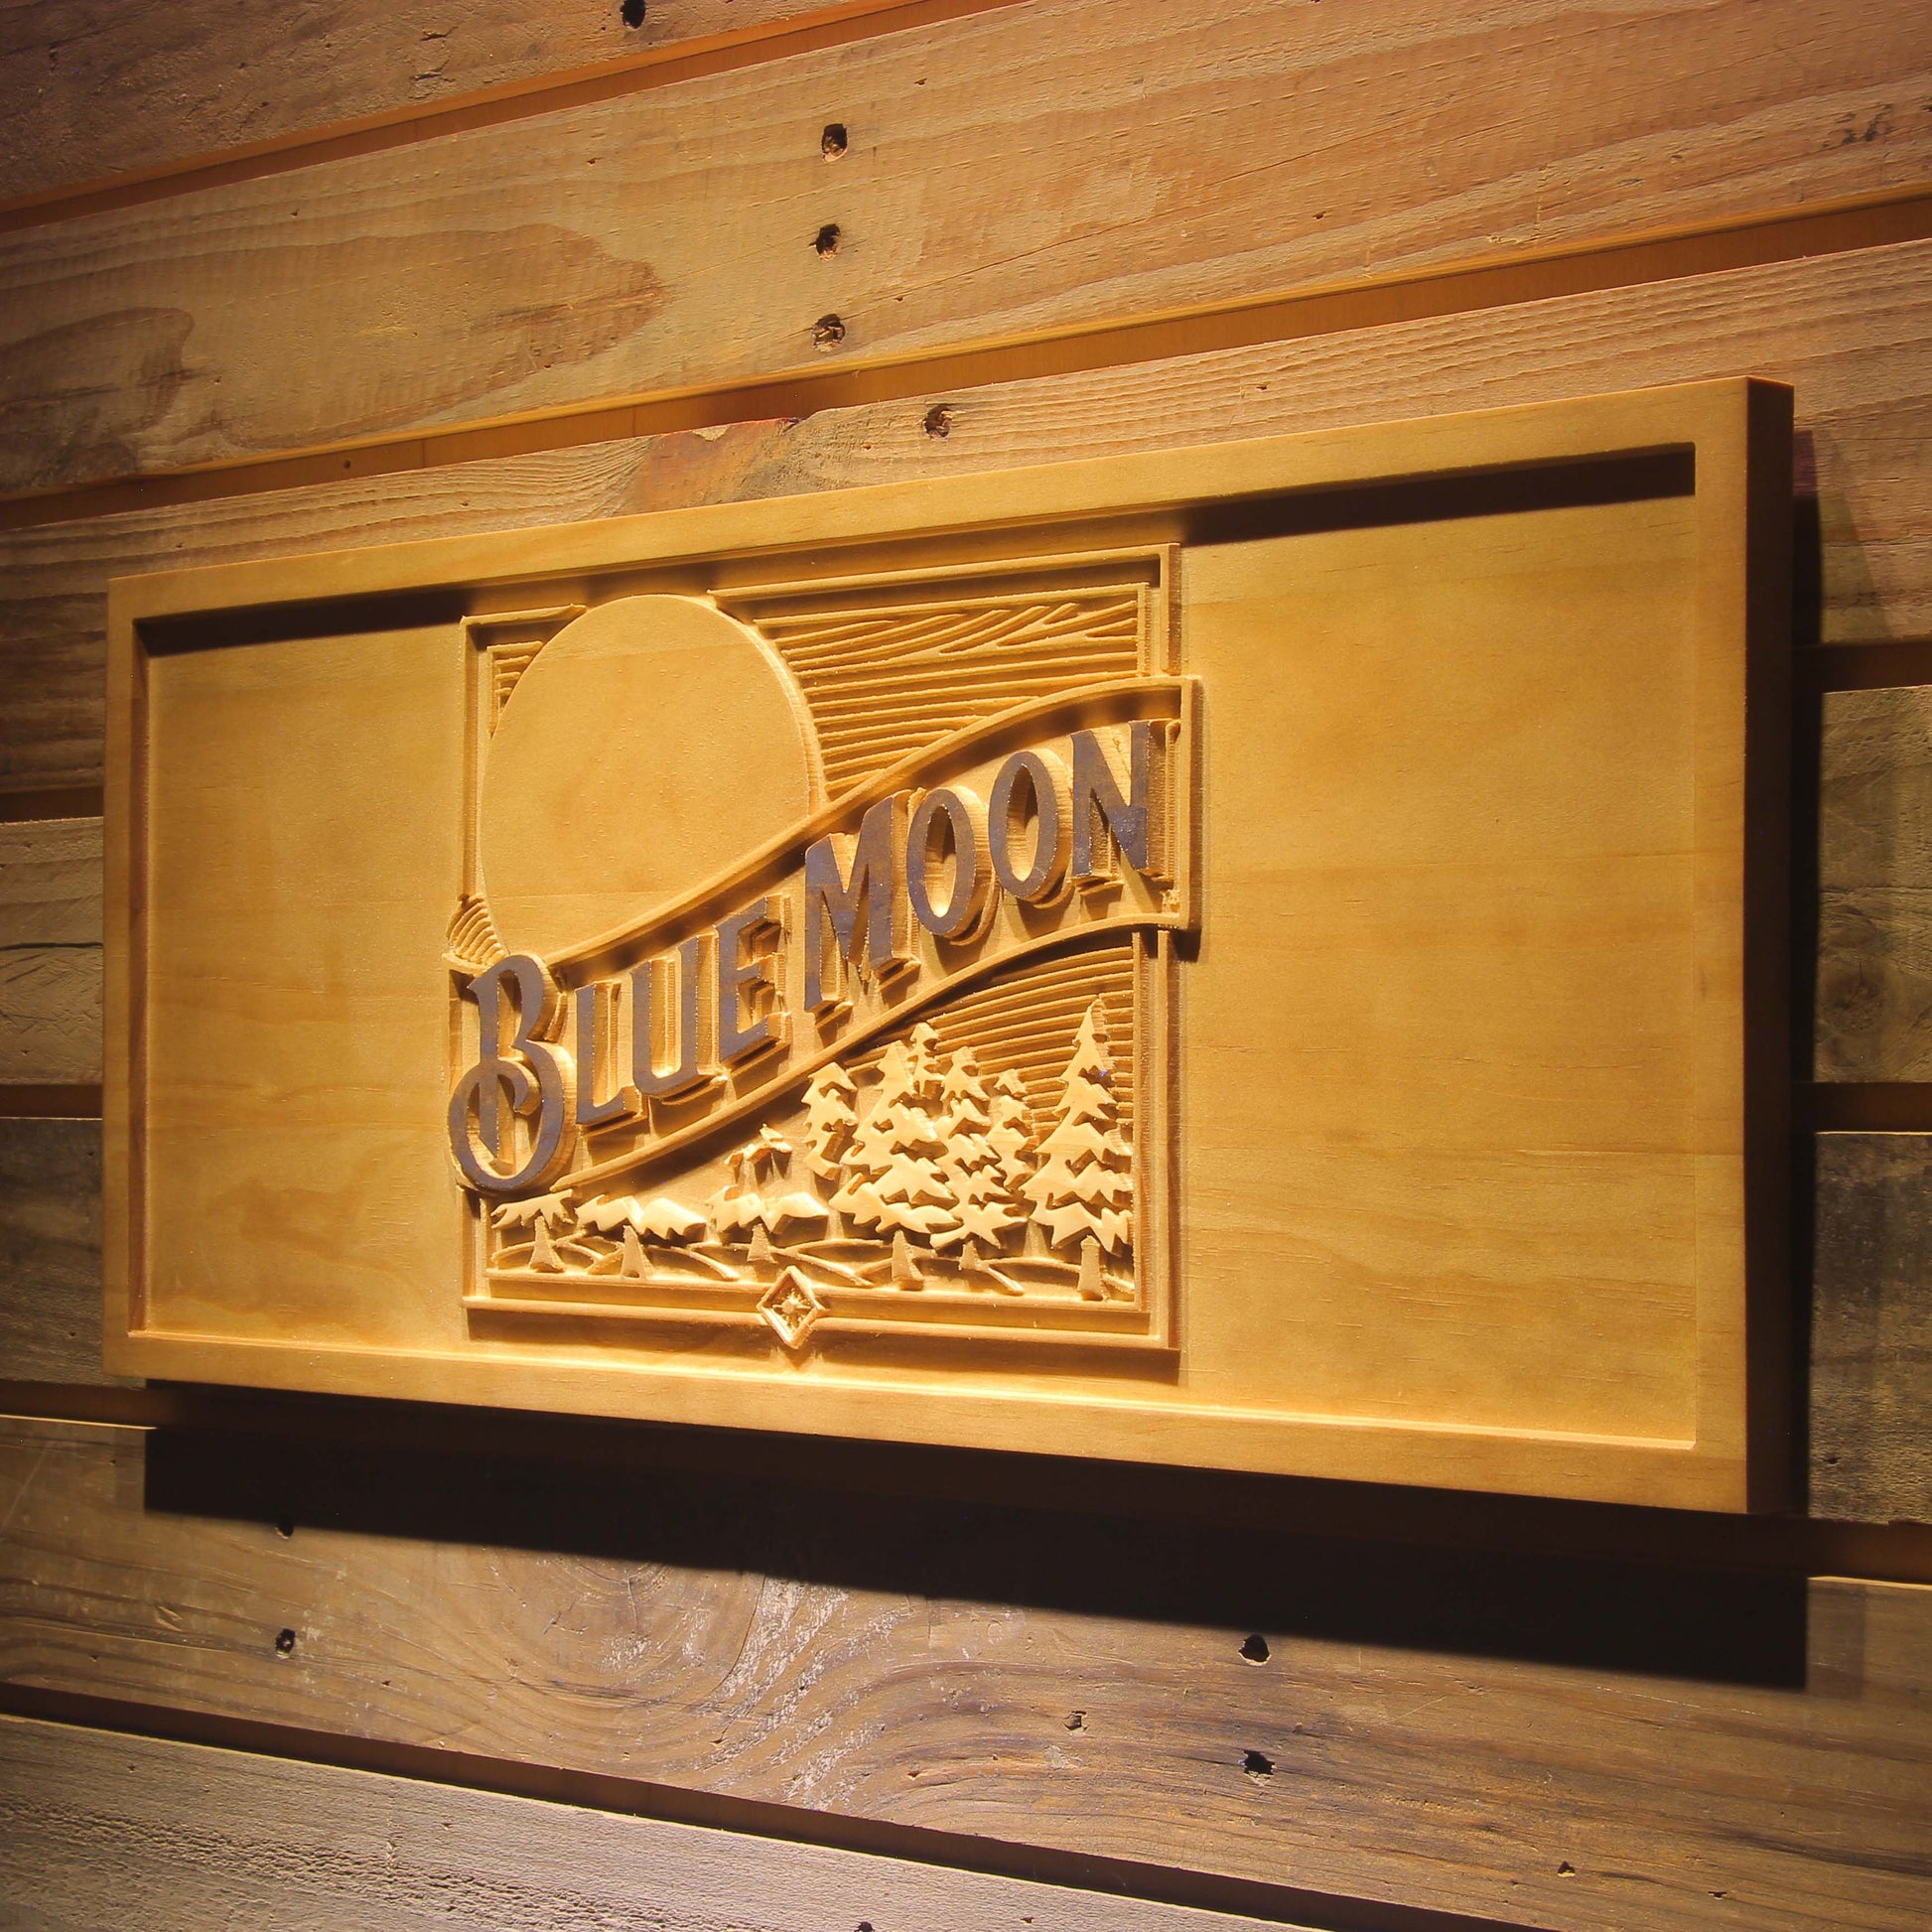 Blue Moon  Bar 3D Wooden Signs by Woody Signs Co. - Handmade Crafted Unique Wooden Creative